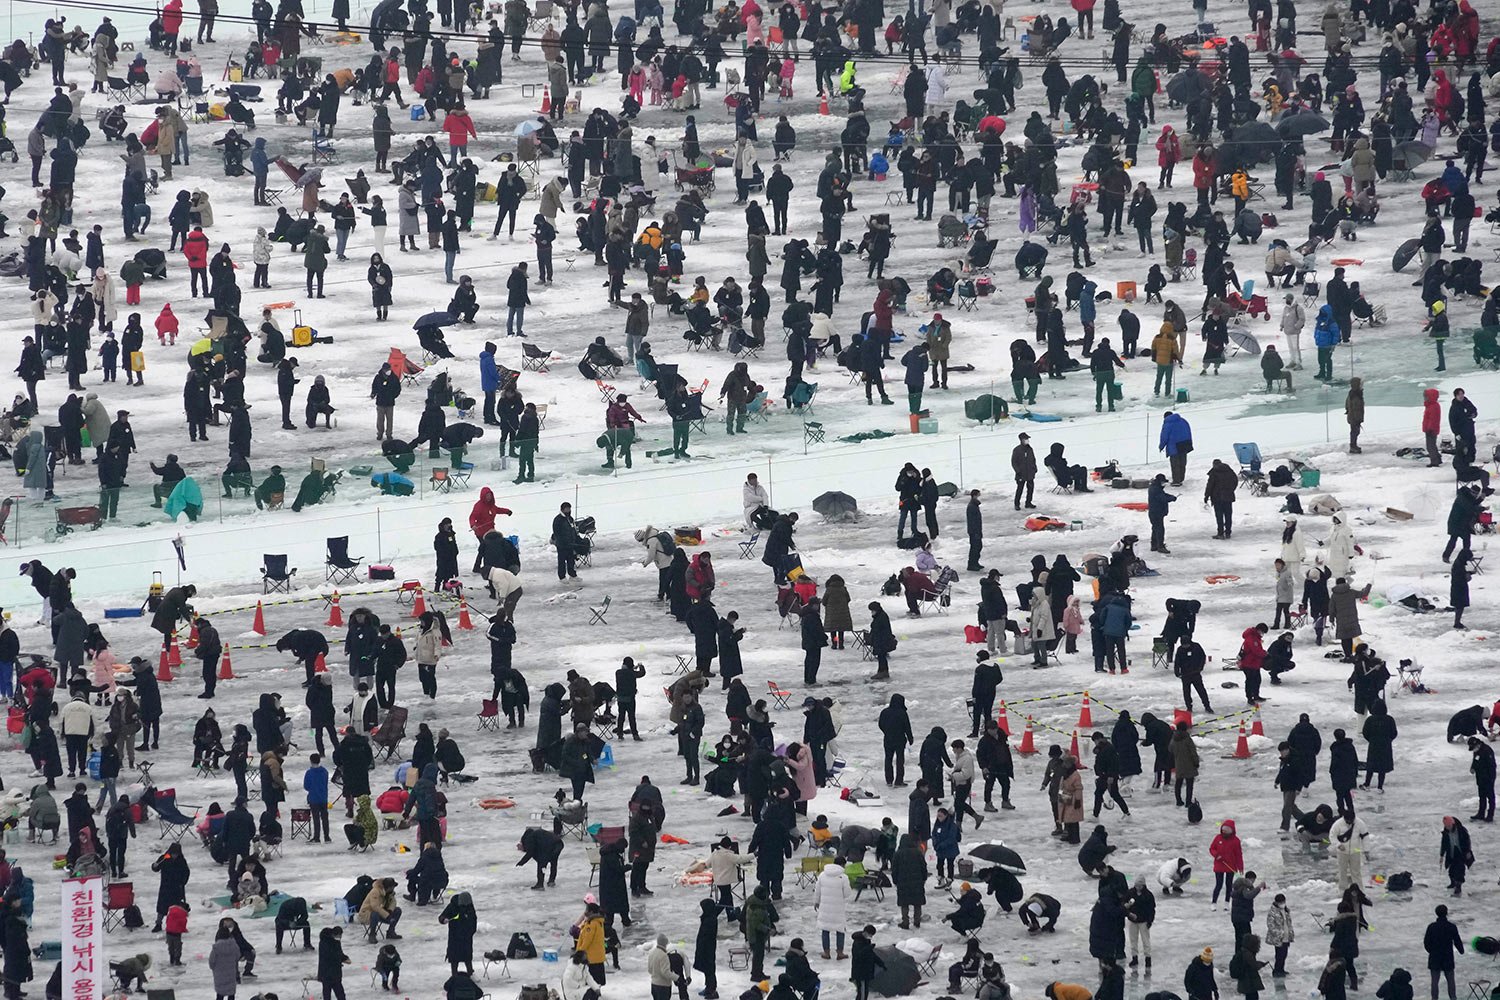  Participants cast lines through holes drilled in the surface of a frozen river during a trout-catching contest in Hwacheon, South Korea, Saturday, Jan. 7, 2023. (AP Photo/Ahn Young-joon) 